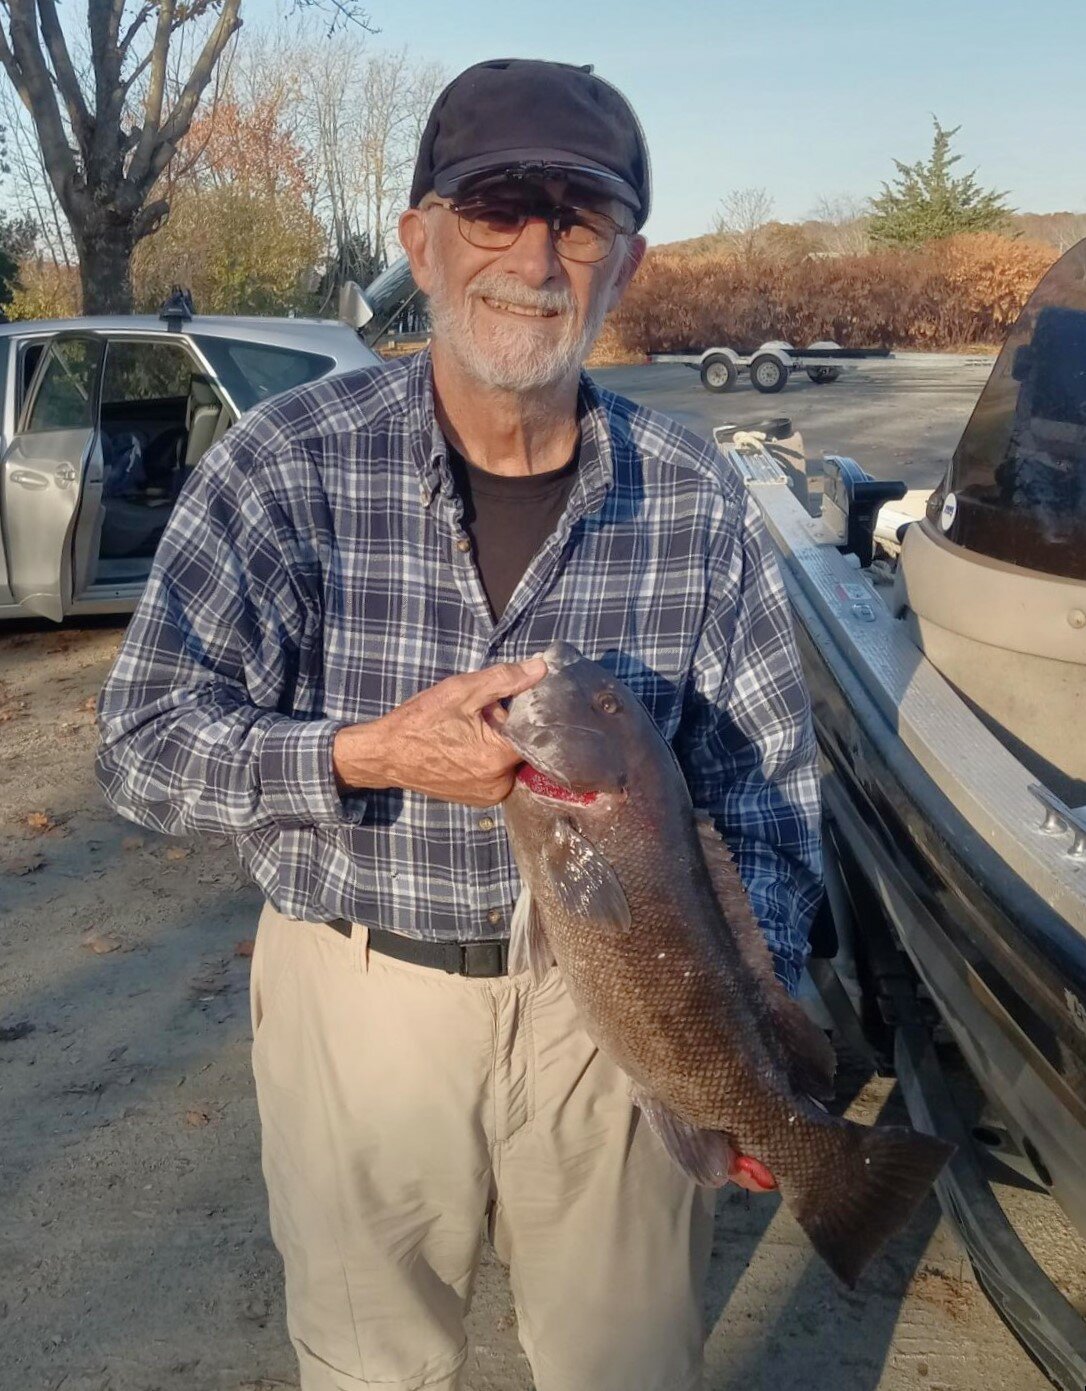 Walt Galloway and his fishing partner Walter Berry caught tautog to 21” earlier this week in the General Rock, North Kingstown area.